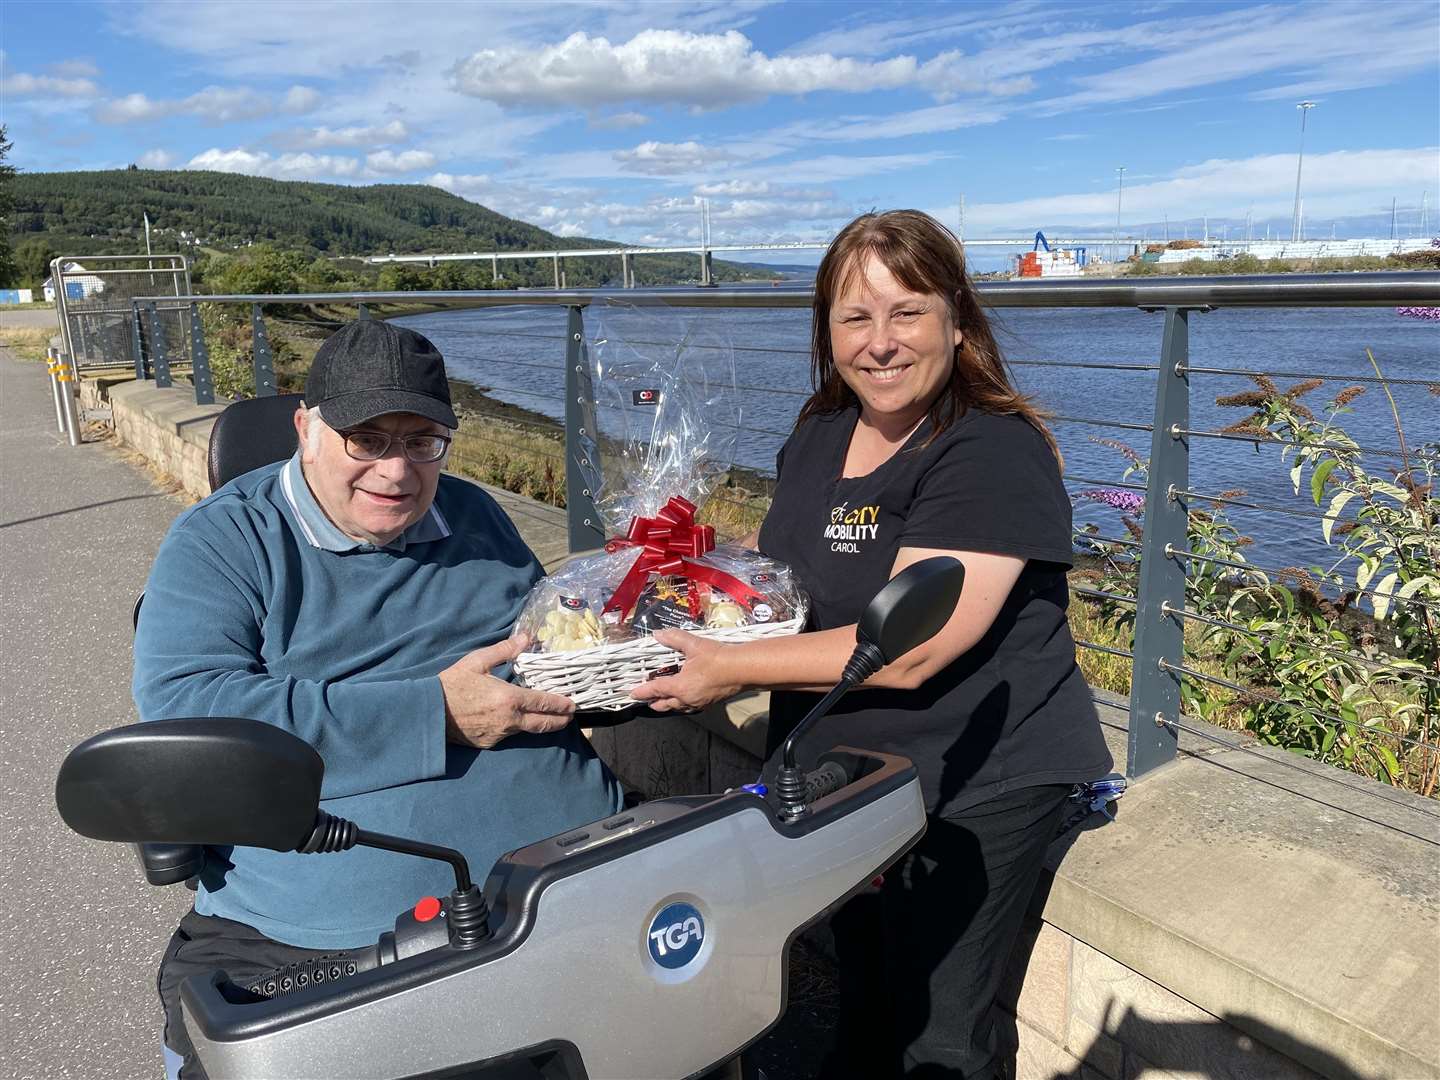 Brian taking delivery of his next new scooter and a thank you chocolate hamper sourced locally from “The Chocolate Place” from City Mobility for being itslongest serving Motability customer.